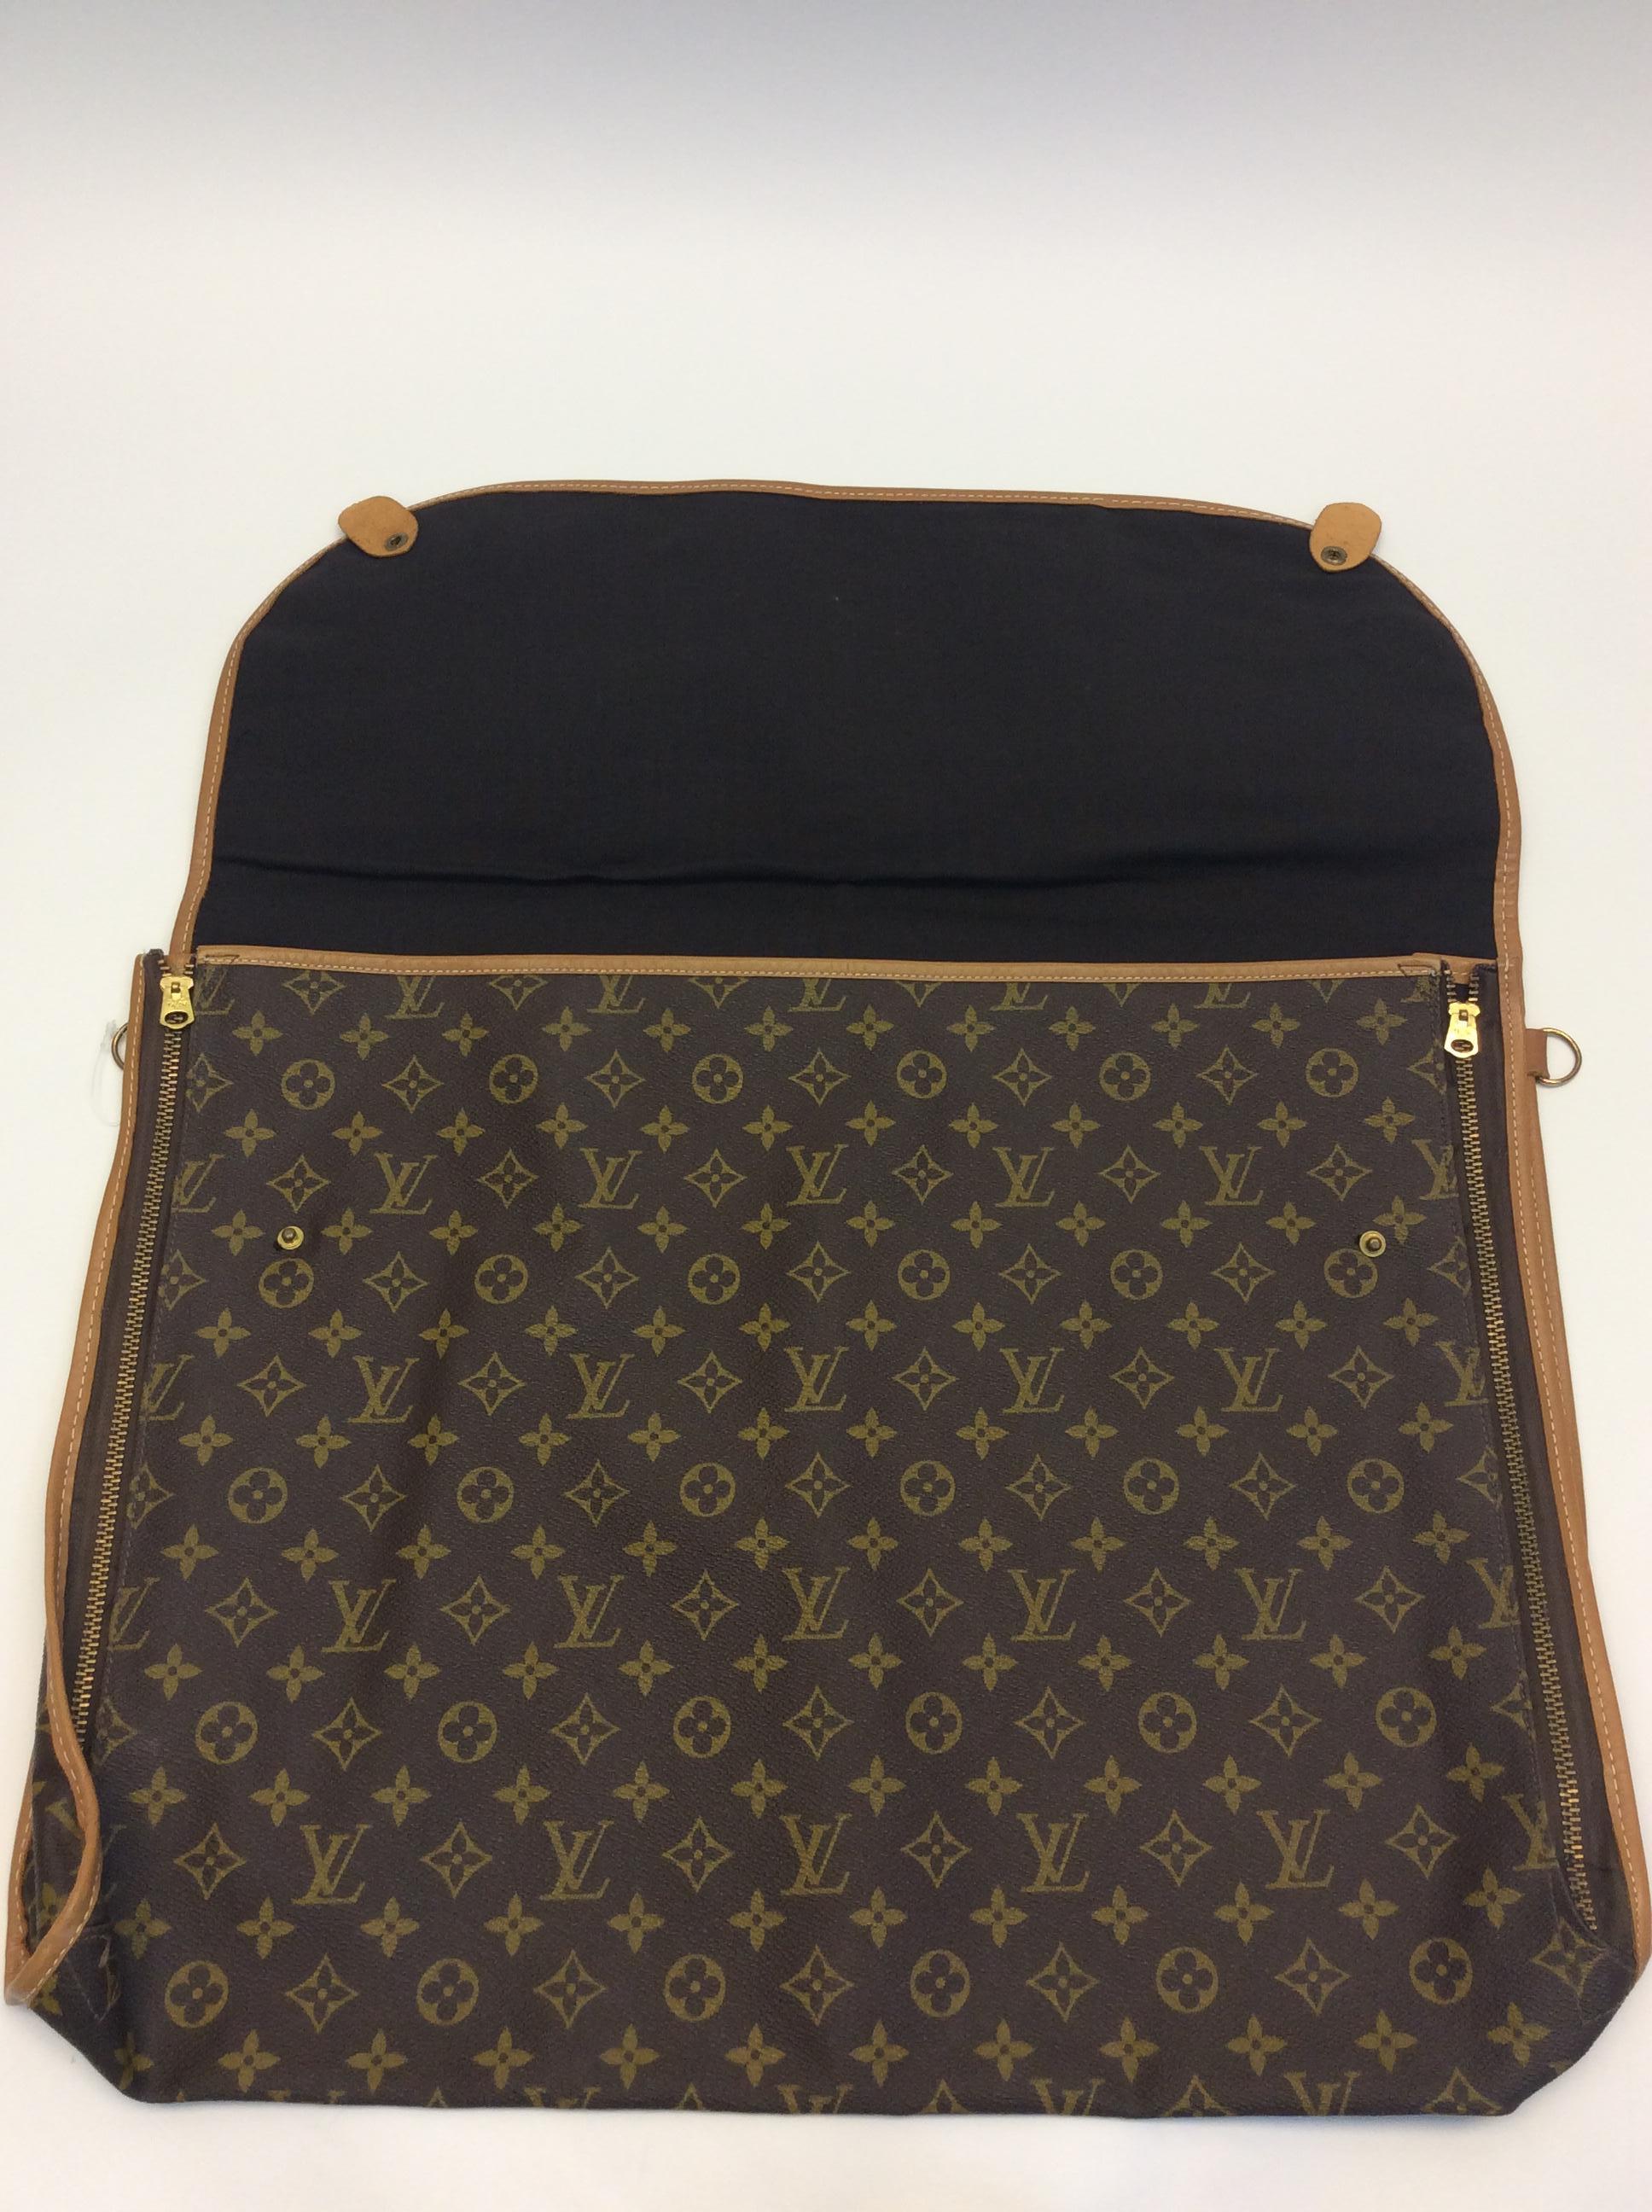 Louis Vuitton Large Luggage Insert In Good Condition For Sale In Narberth, PA